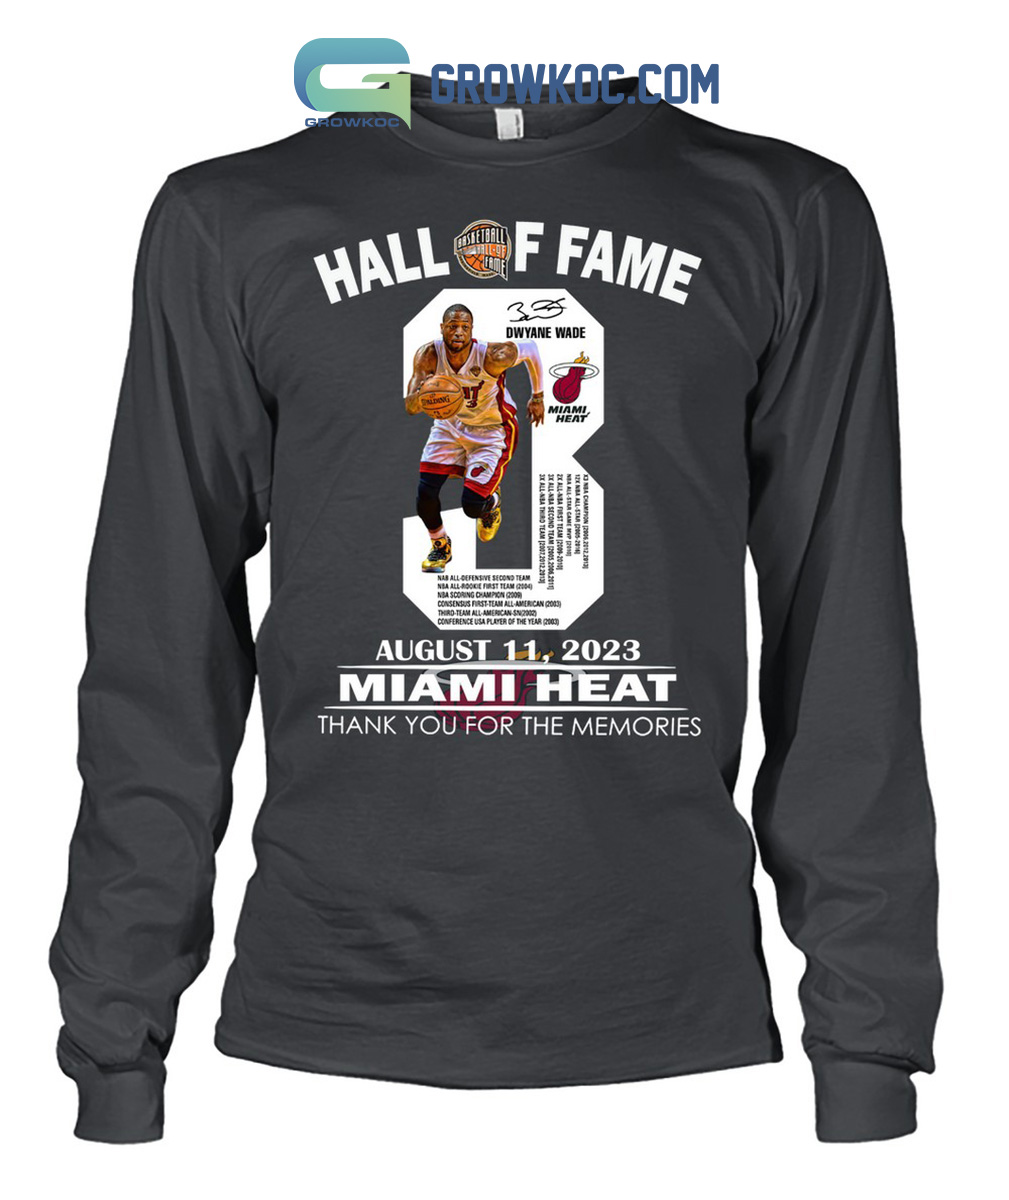 Miami Heat lets go heat shirt, hoodie, sweater, long sleeve and